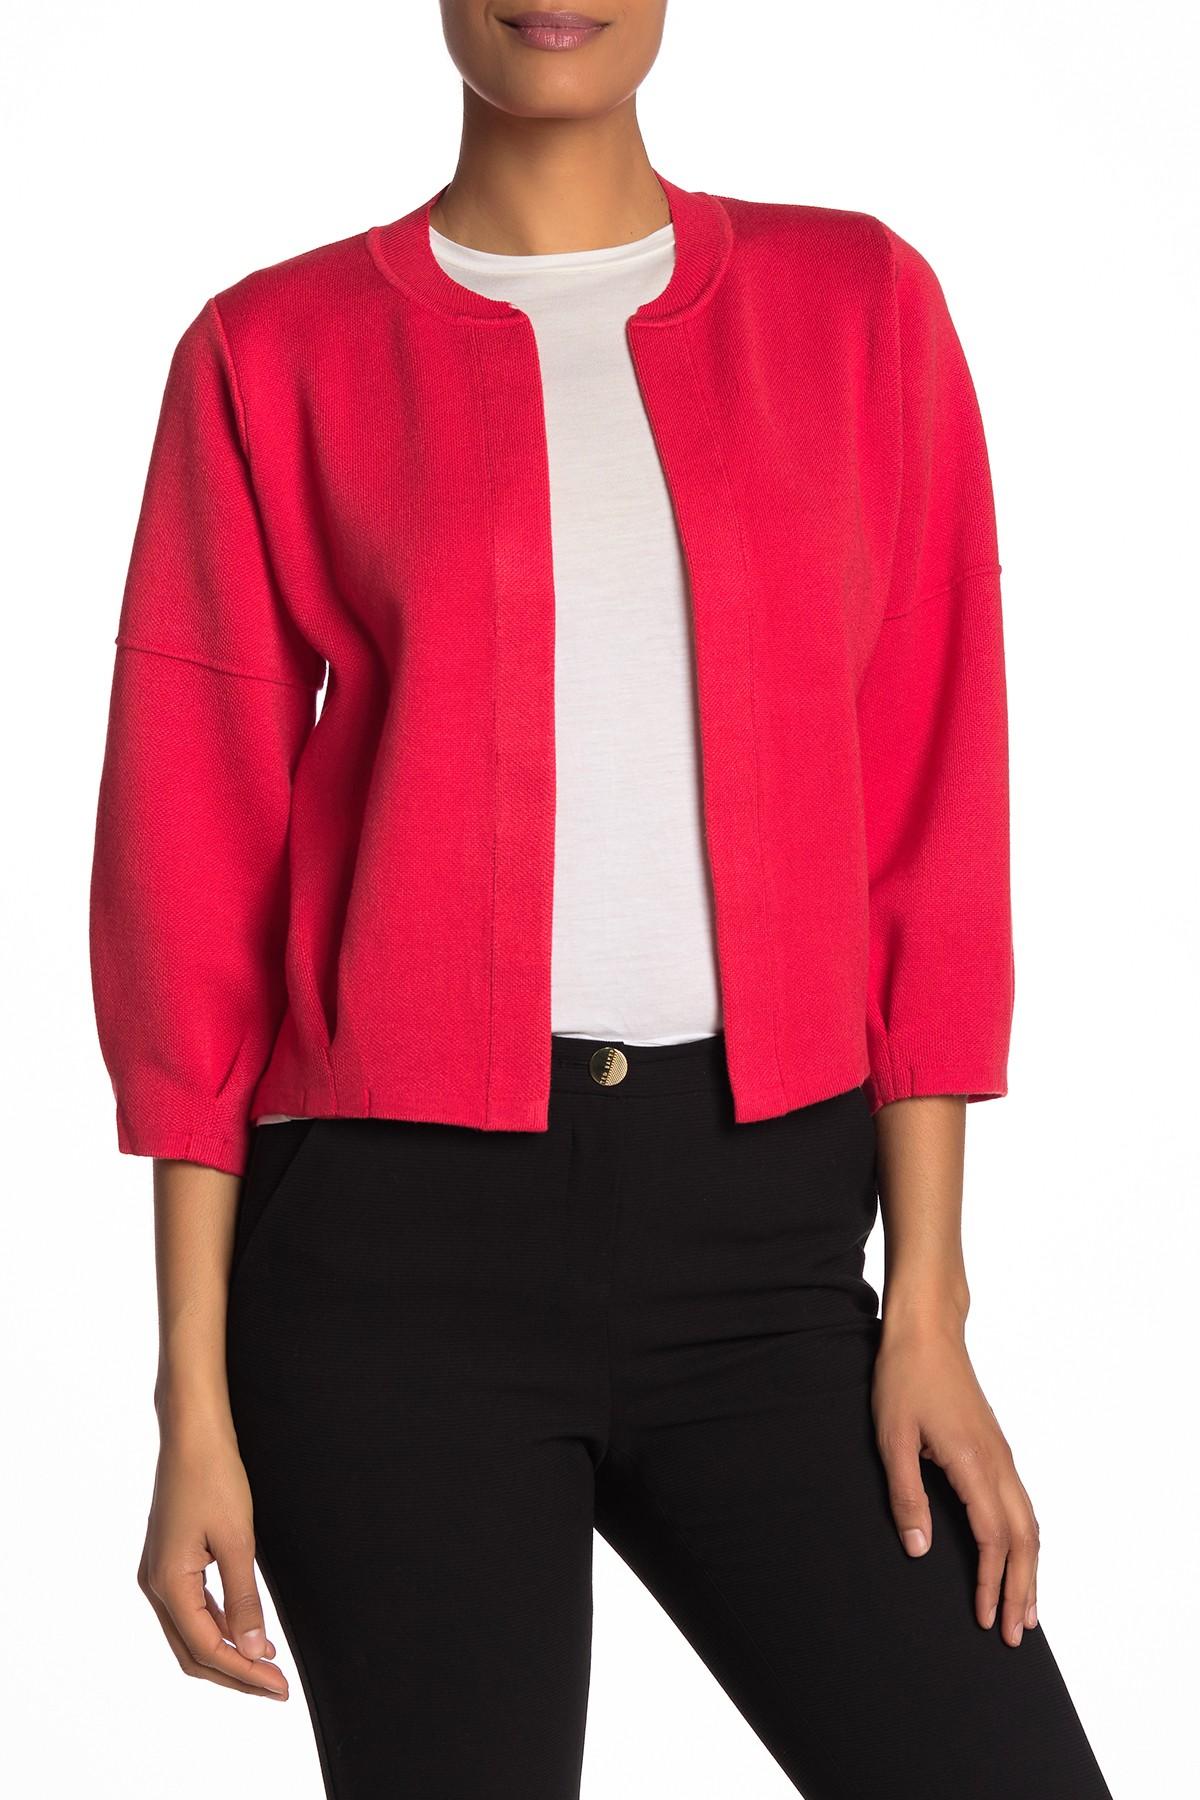 Lyst - T Tahari 3/4 Sleeve Open Front Knit Cardigan in Red